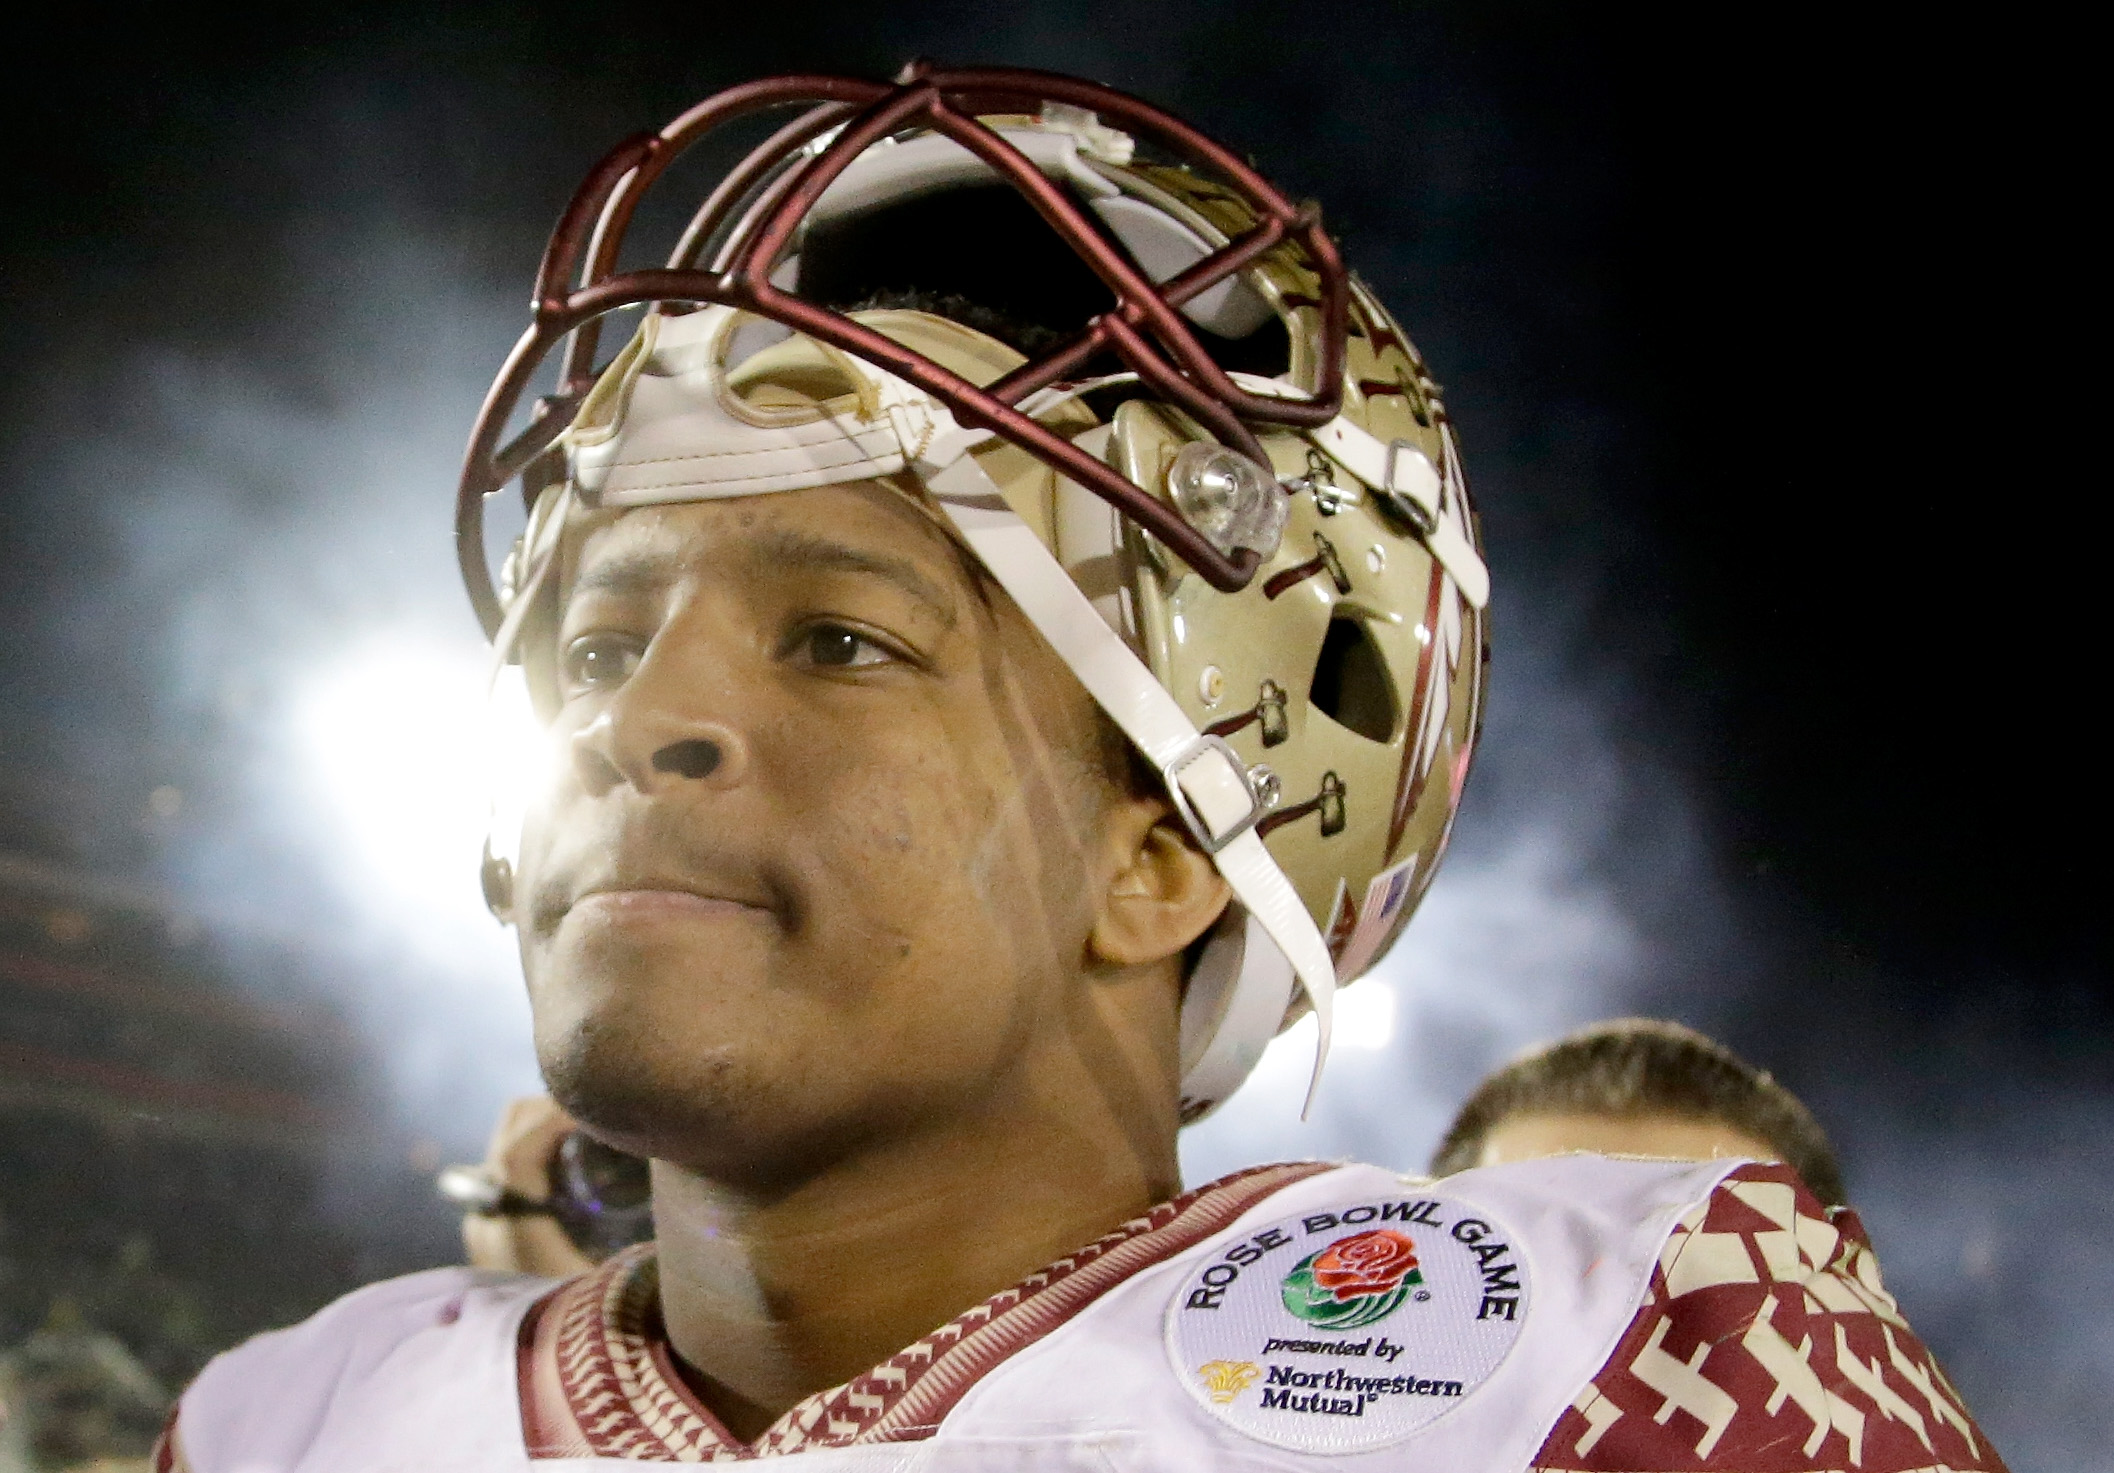 Quarterback Jameis Winston of the Florida State Seminoles reacts after losing 59-20 to the Oregon Ducks in the College Football Playoff Semifinal on Jan. 1, 2015 in Pasadena, Calif.